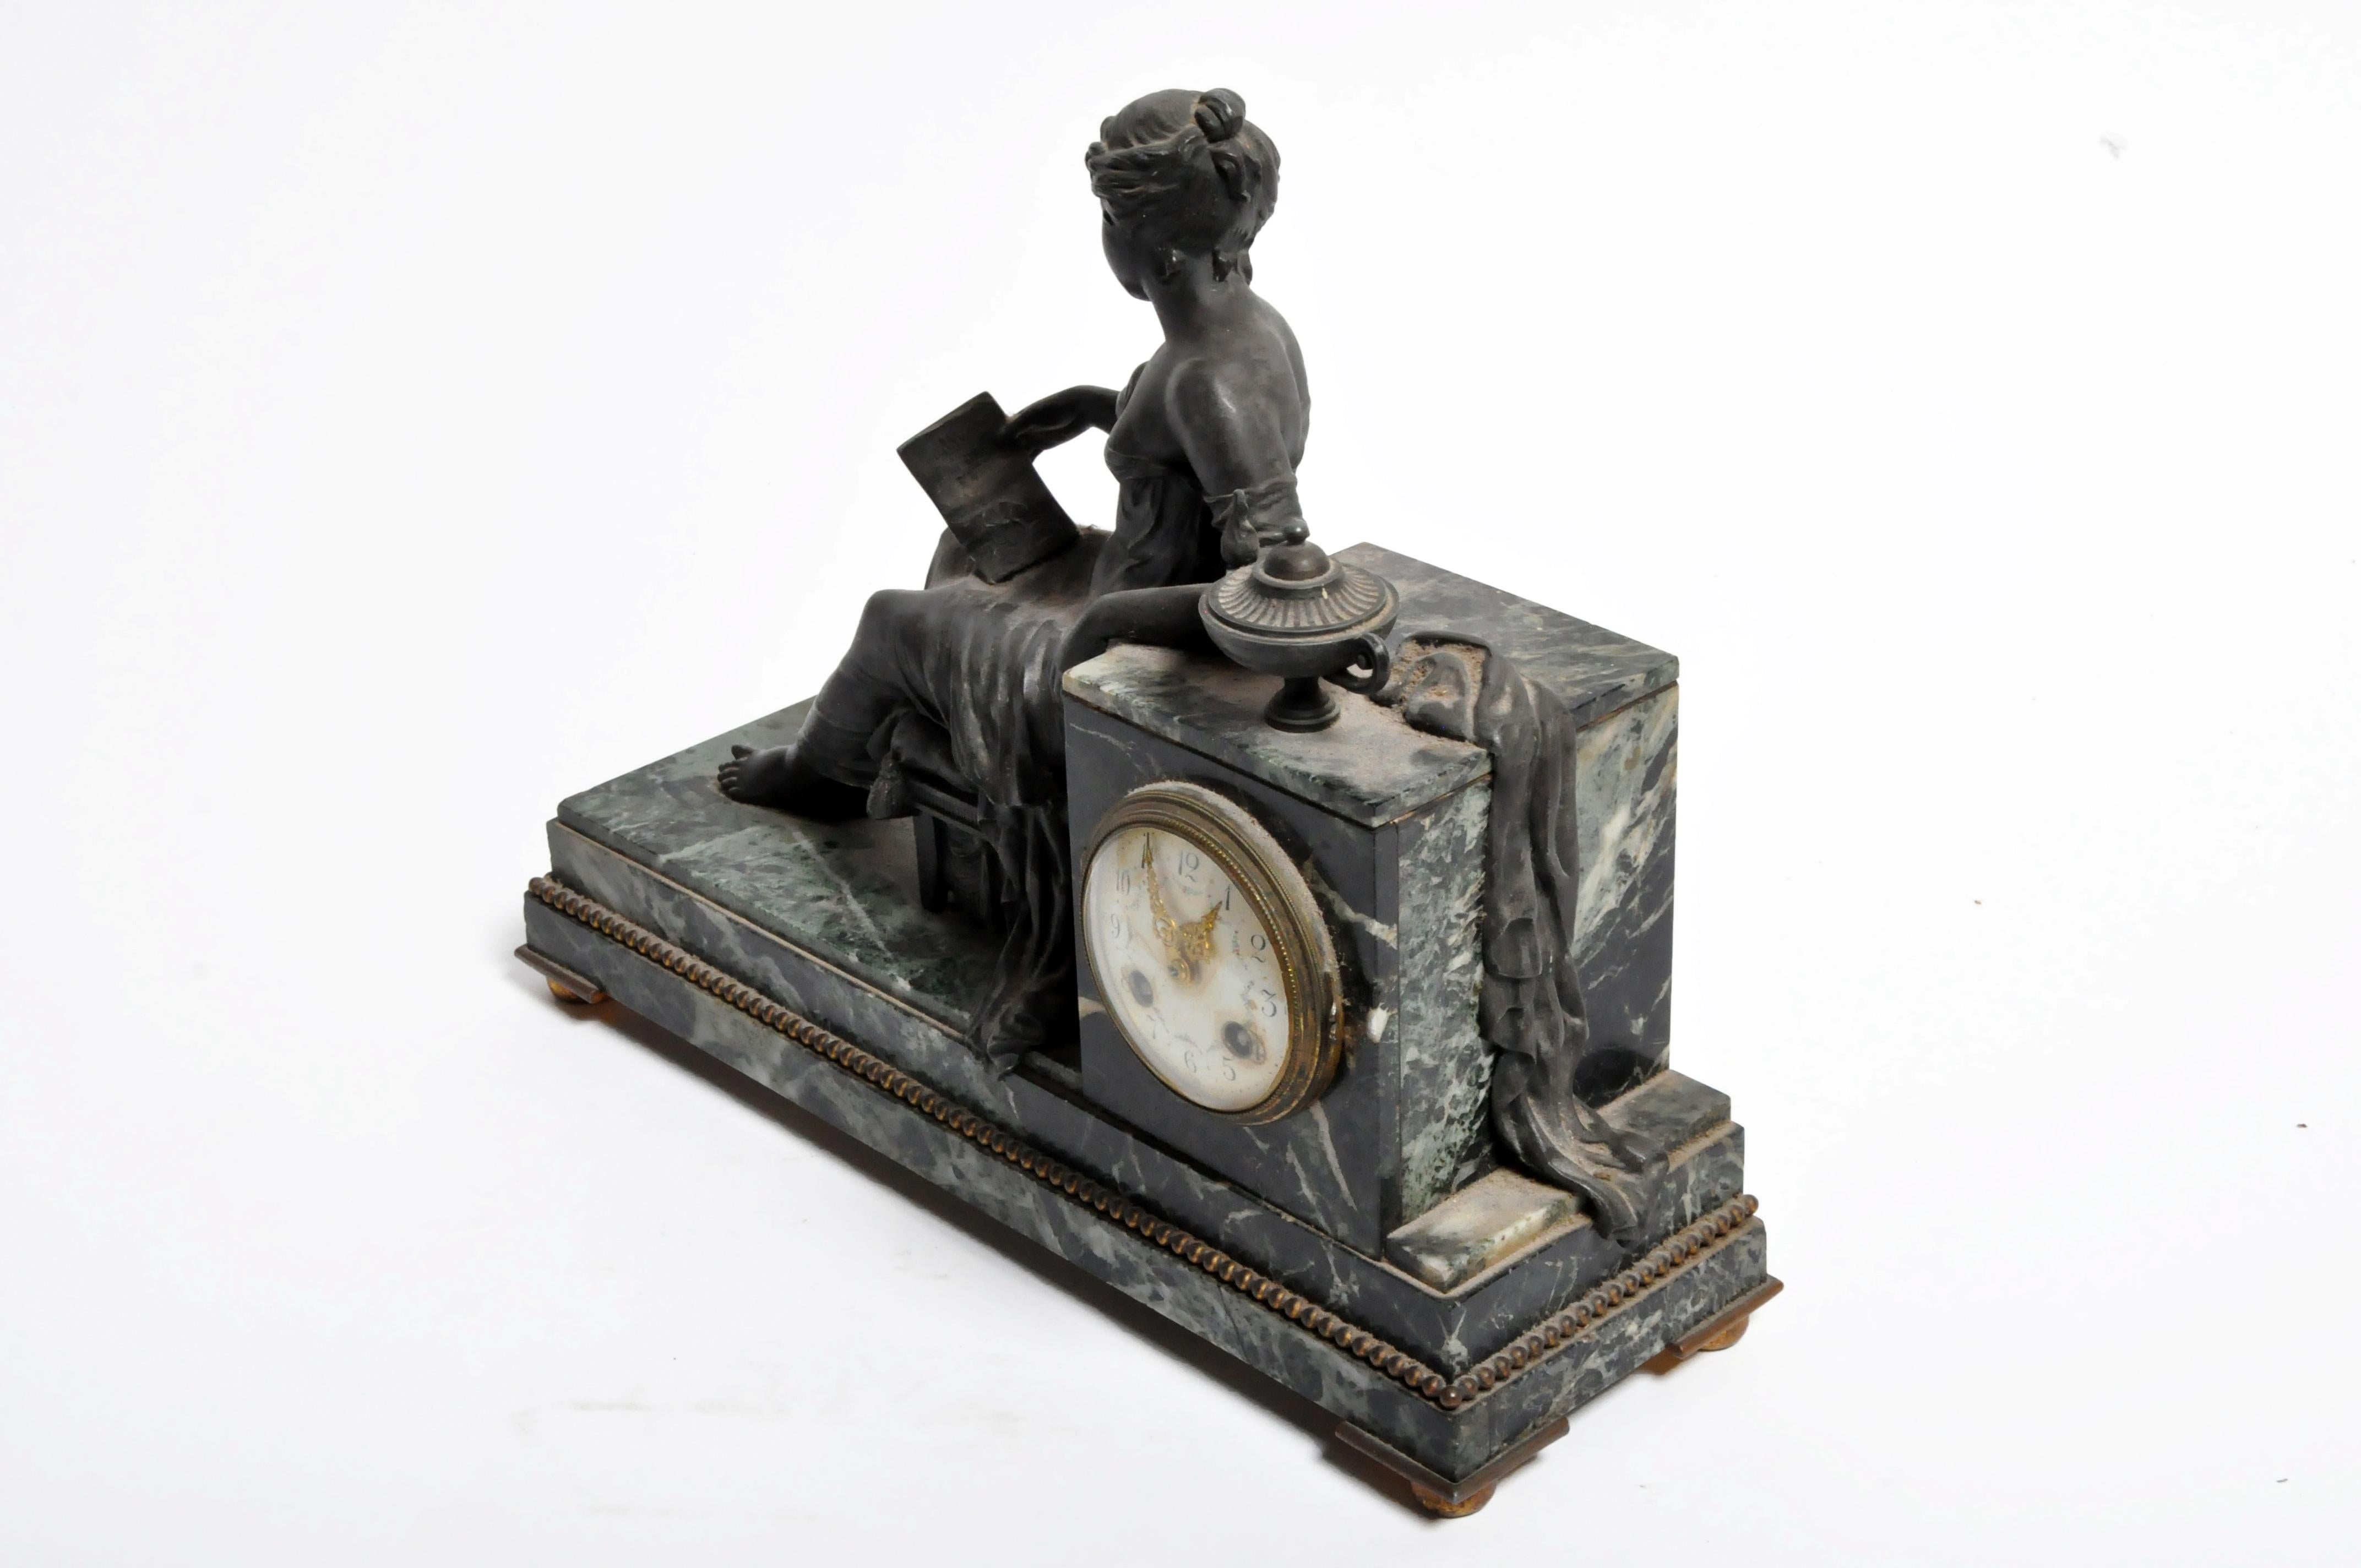 This elegant mantel clock features a reclining woman reading by lantern light. The clock was made in France from cast bronze and marble and dates to the 19th century. Movement is original there is no key. Operation uncertain.